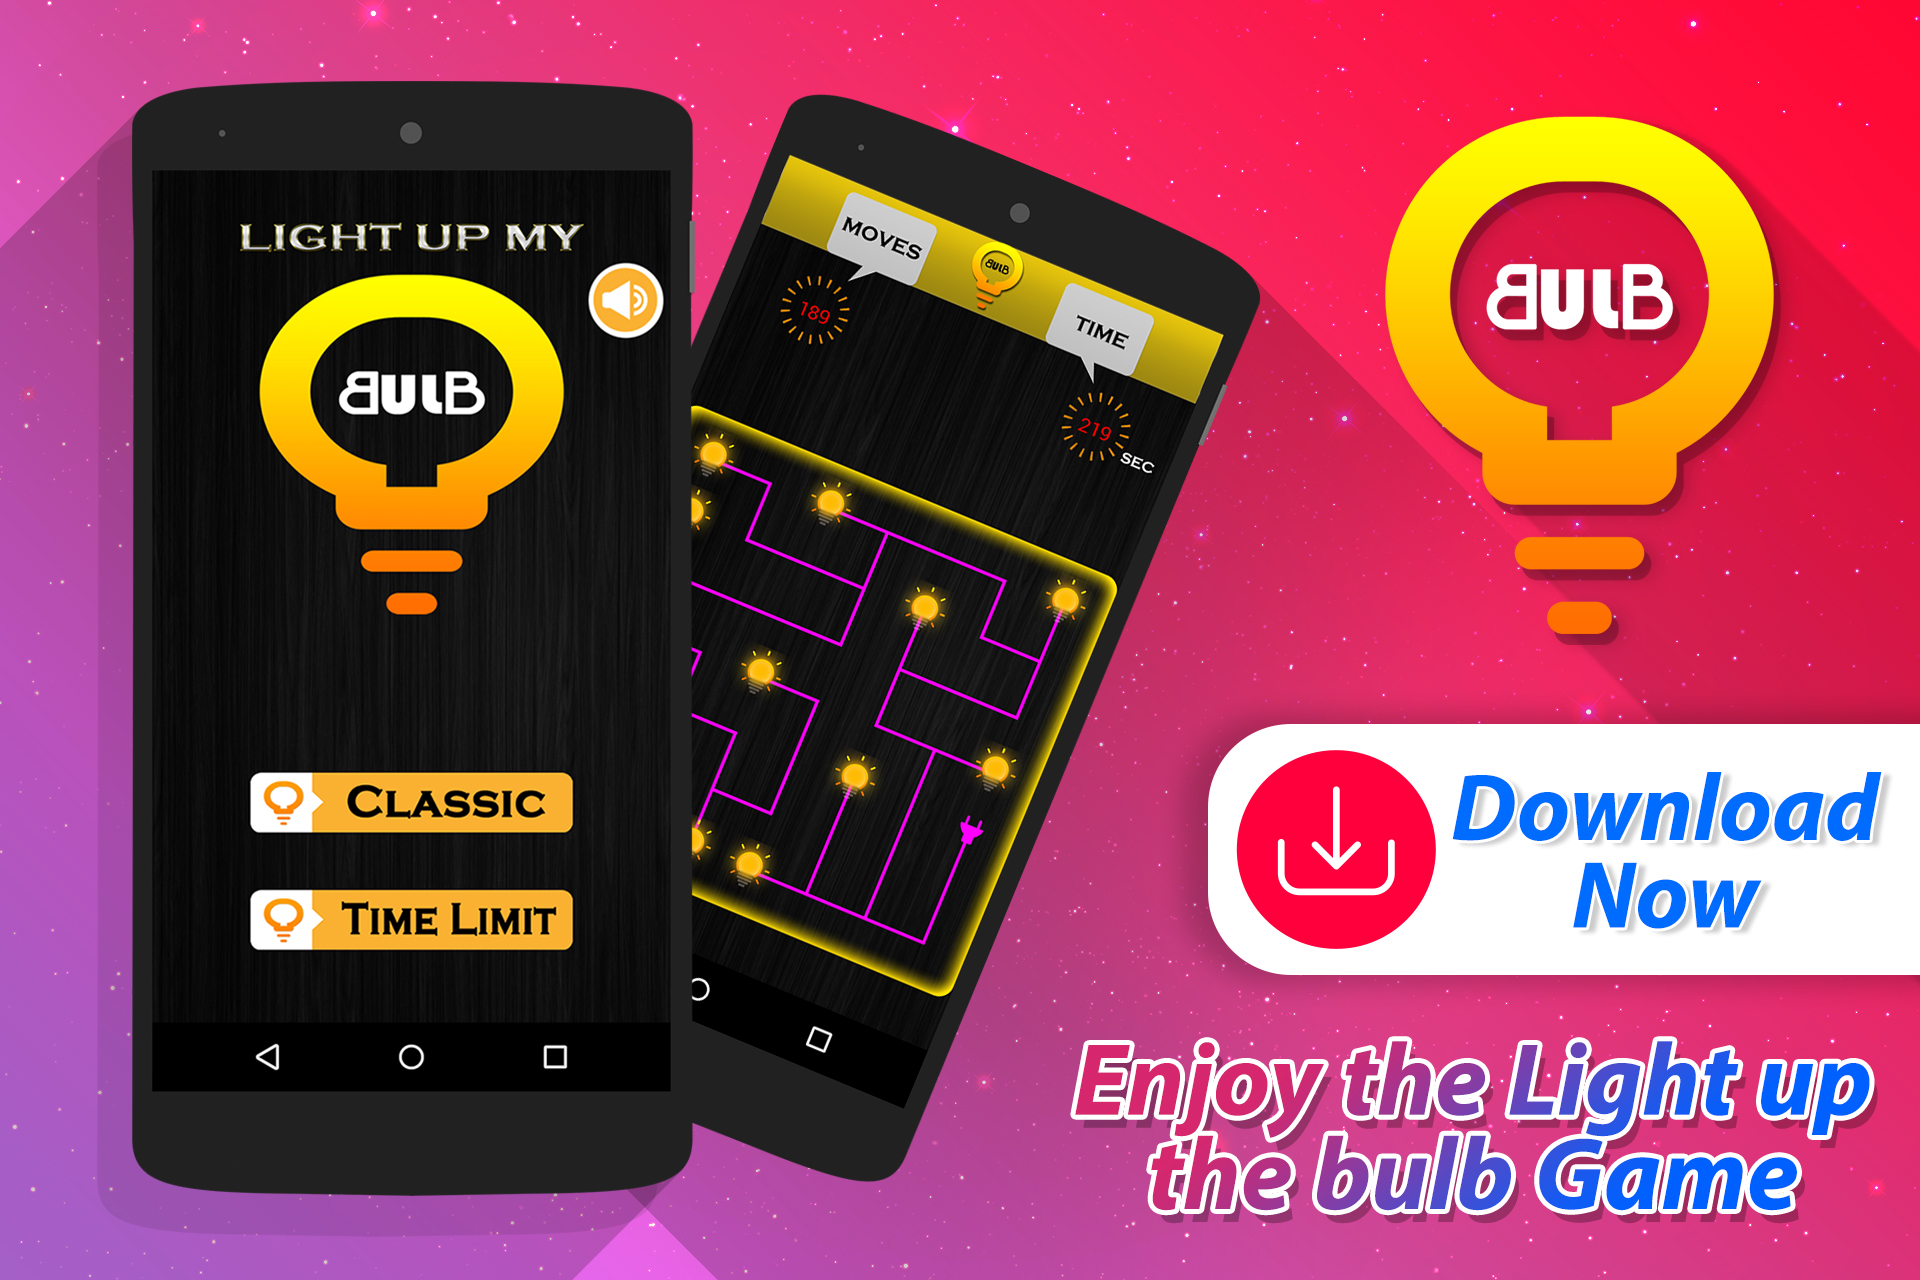 Light Bulb Puzzle Game